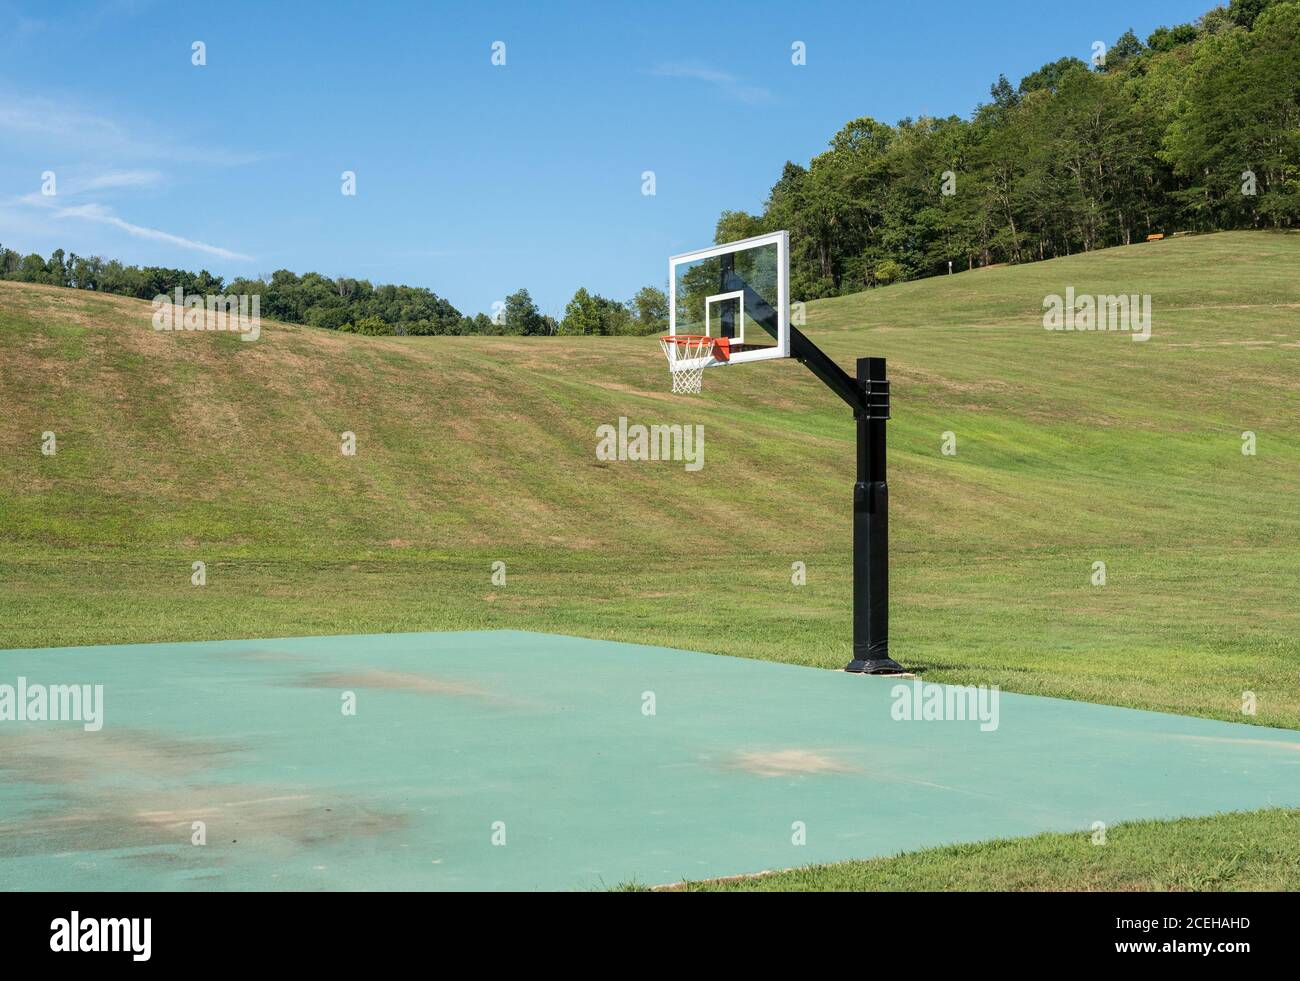 Empty court for basketball or netball in state park surrounded by hills and trees in the distance. No people. Stock Photo